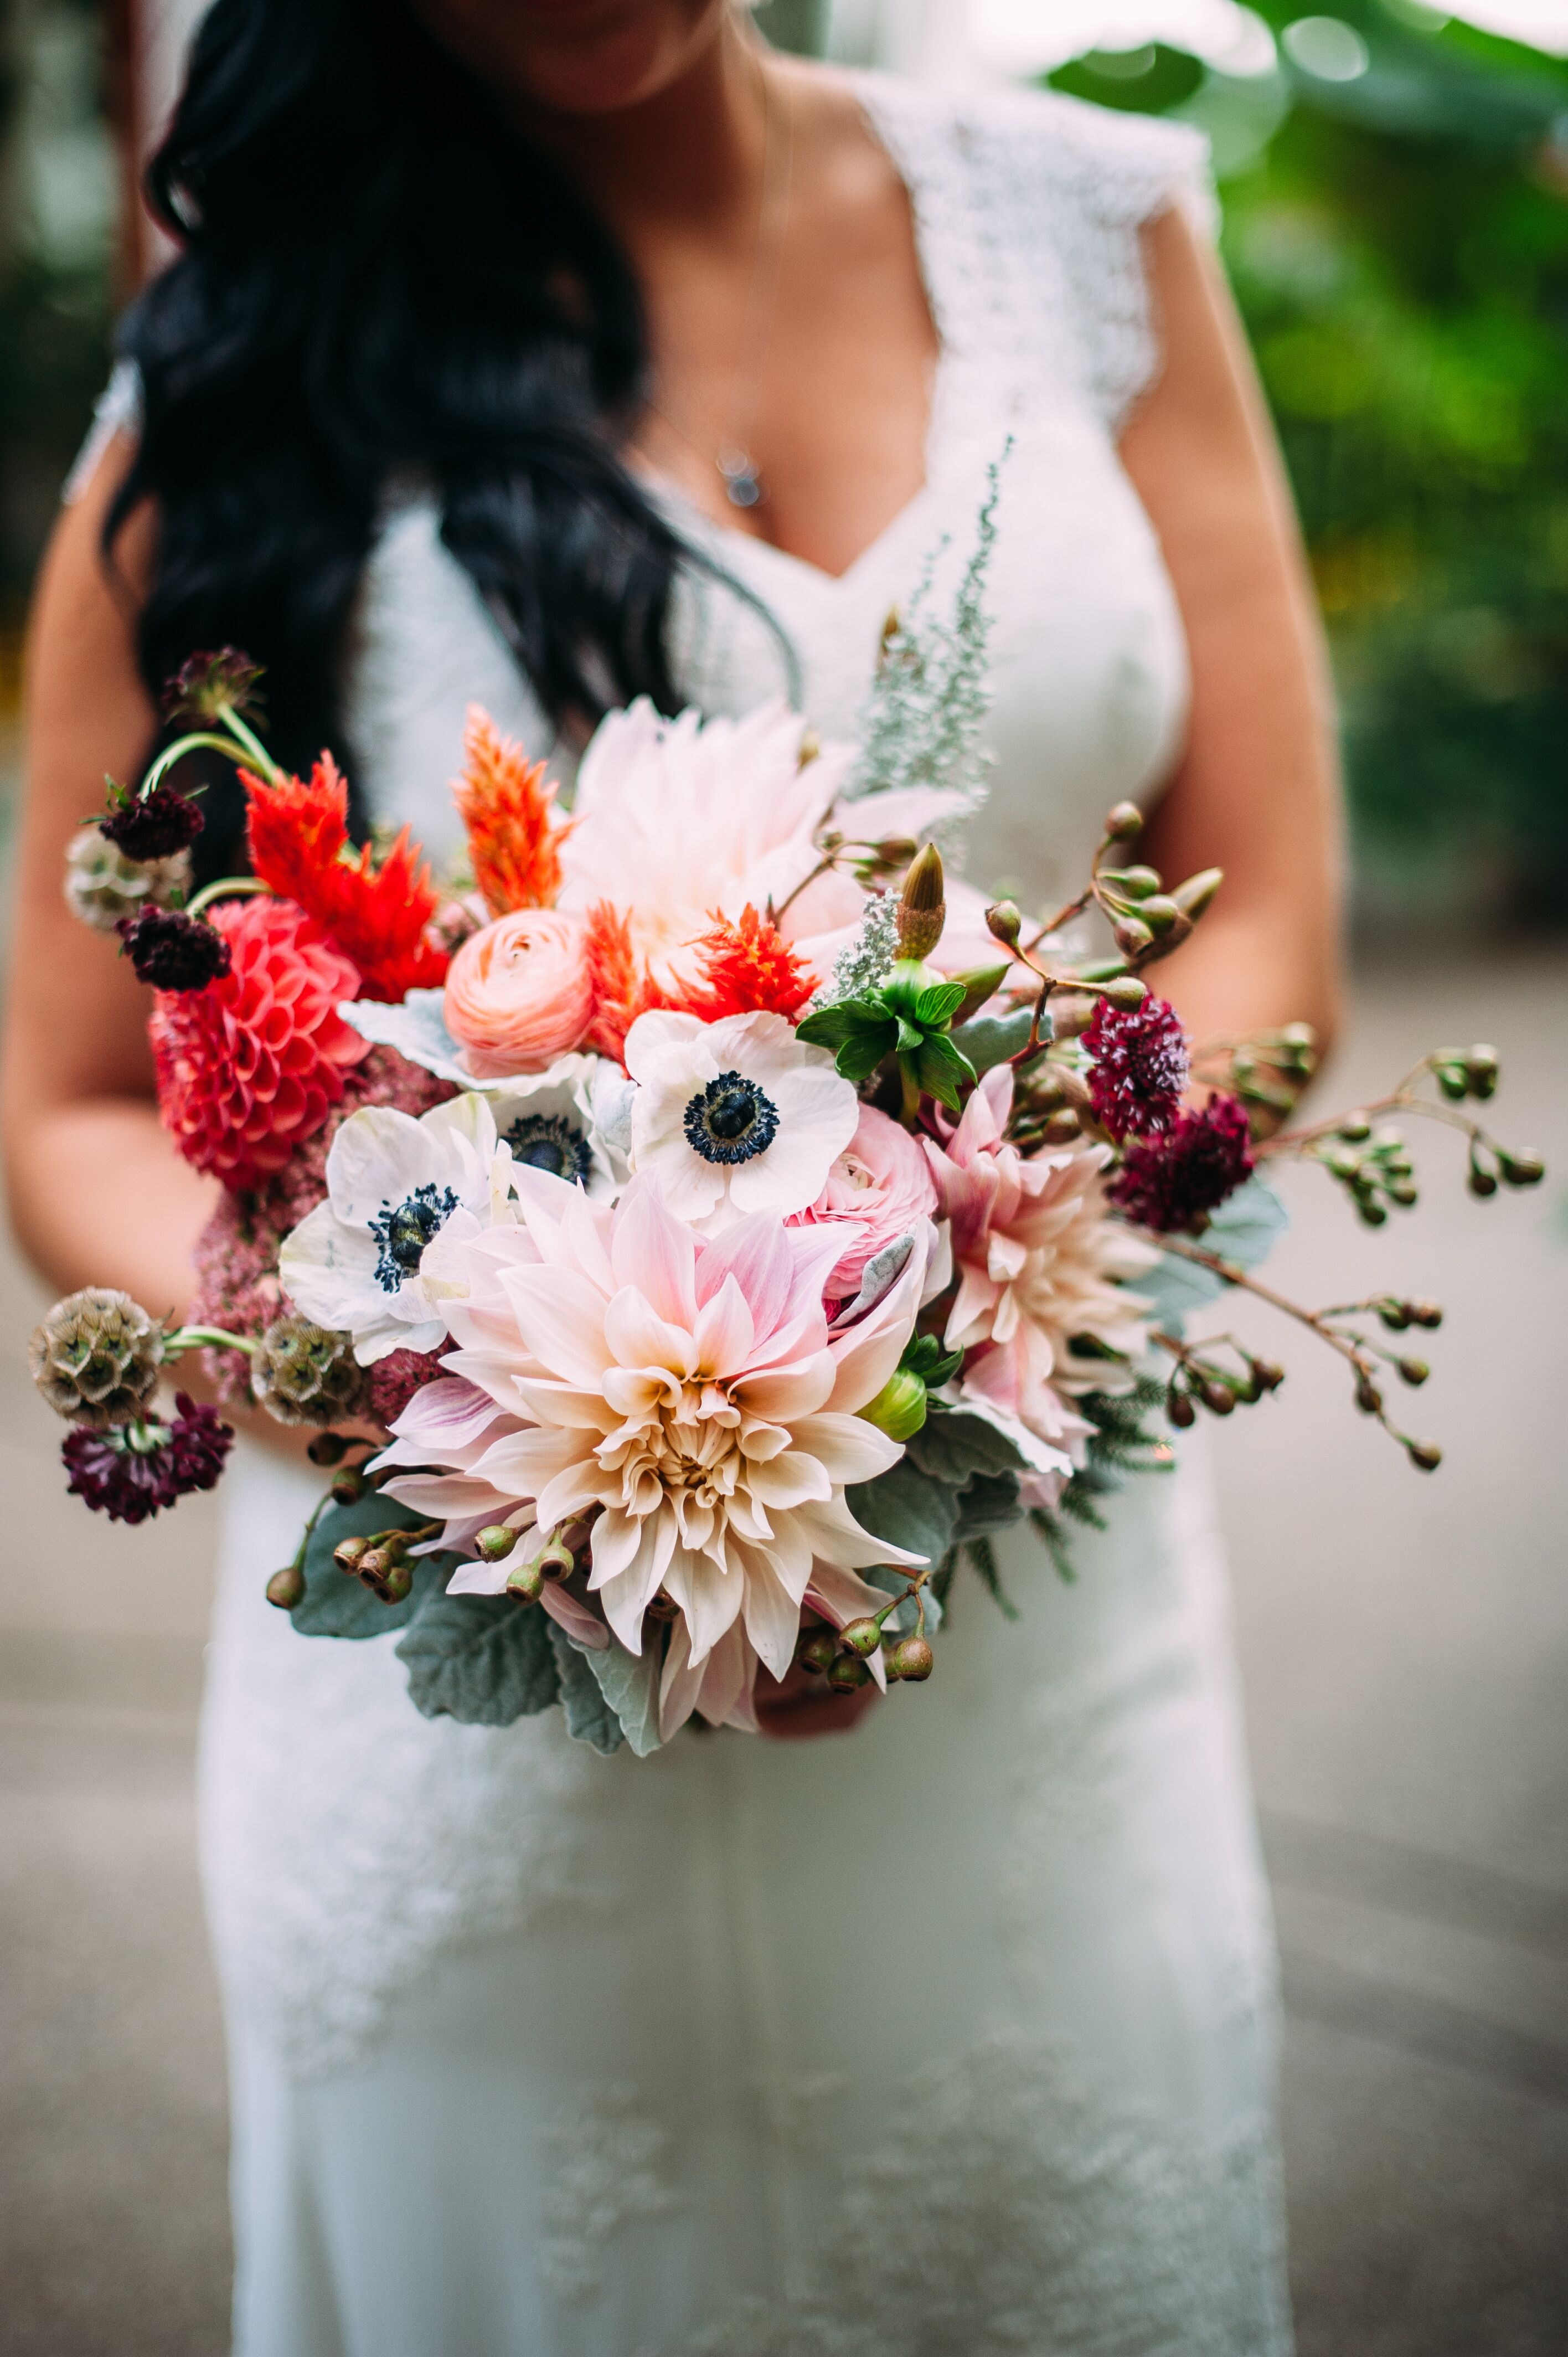 Bride With Colorful Flower Bouquet